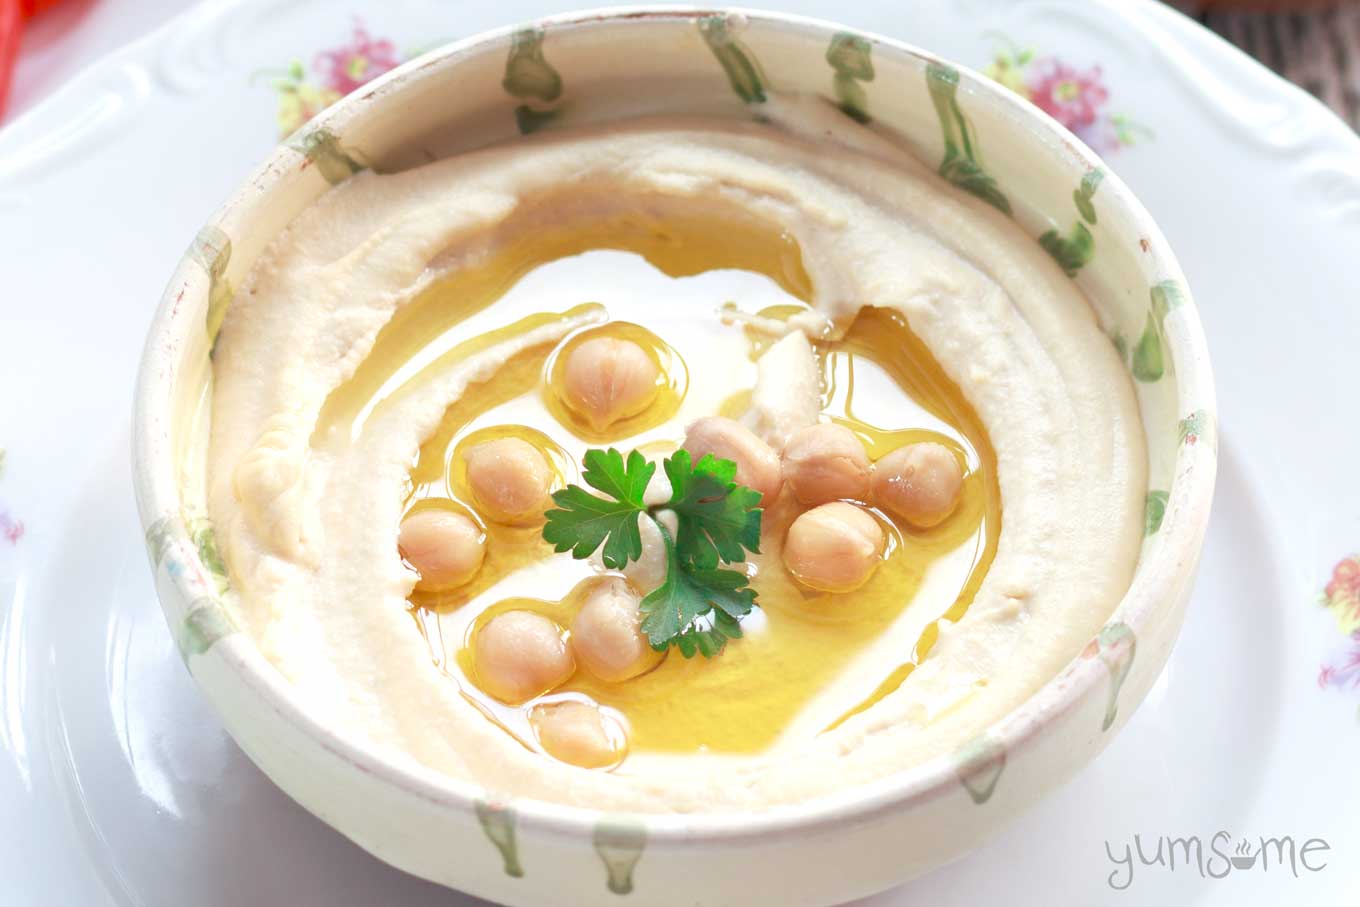 Smooth and creamy hummus in a decorated bowl.